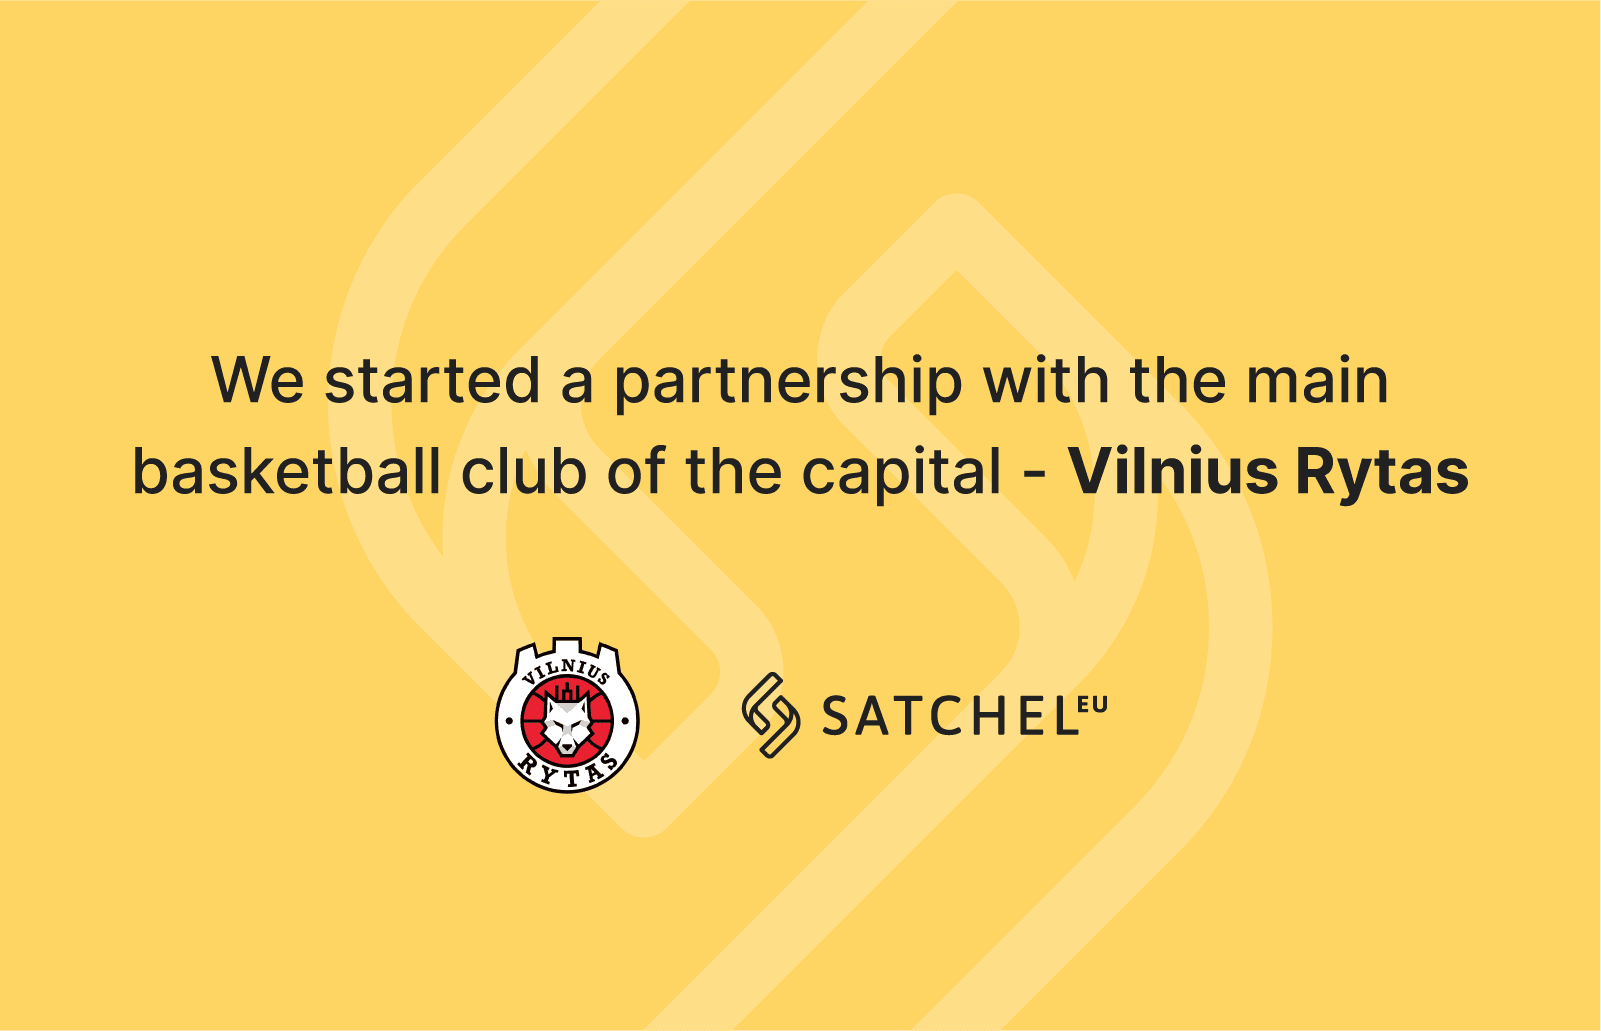 Satchel, a Lithuanian Electronic Money Institution, has become a silver sponsor of the Vilniaus Rytas basketball team